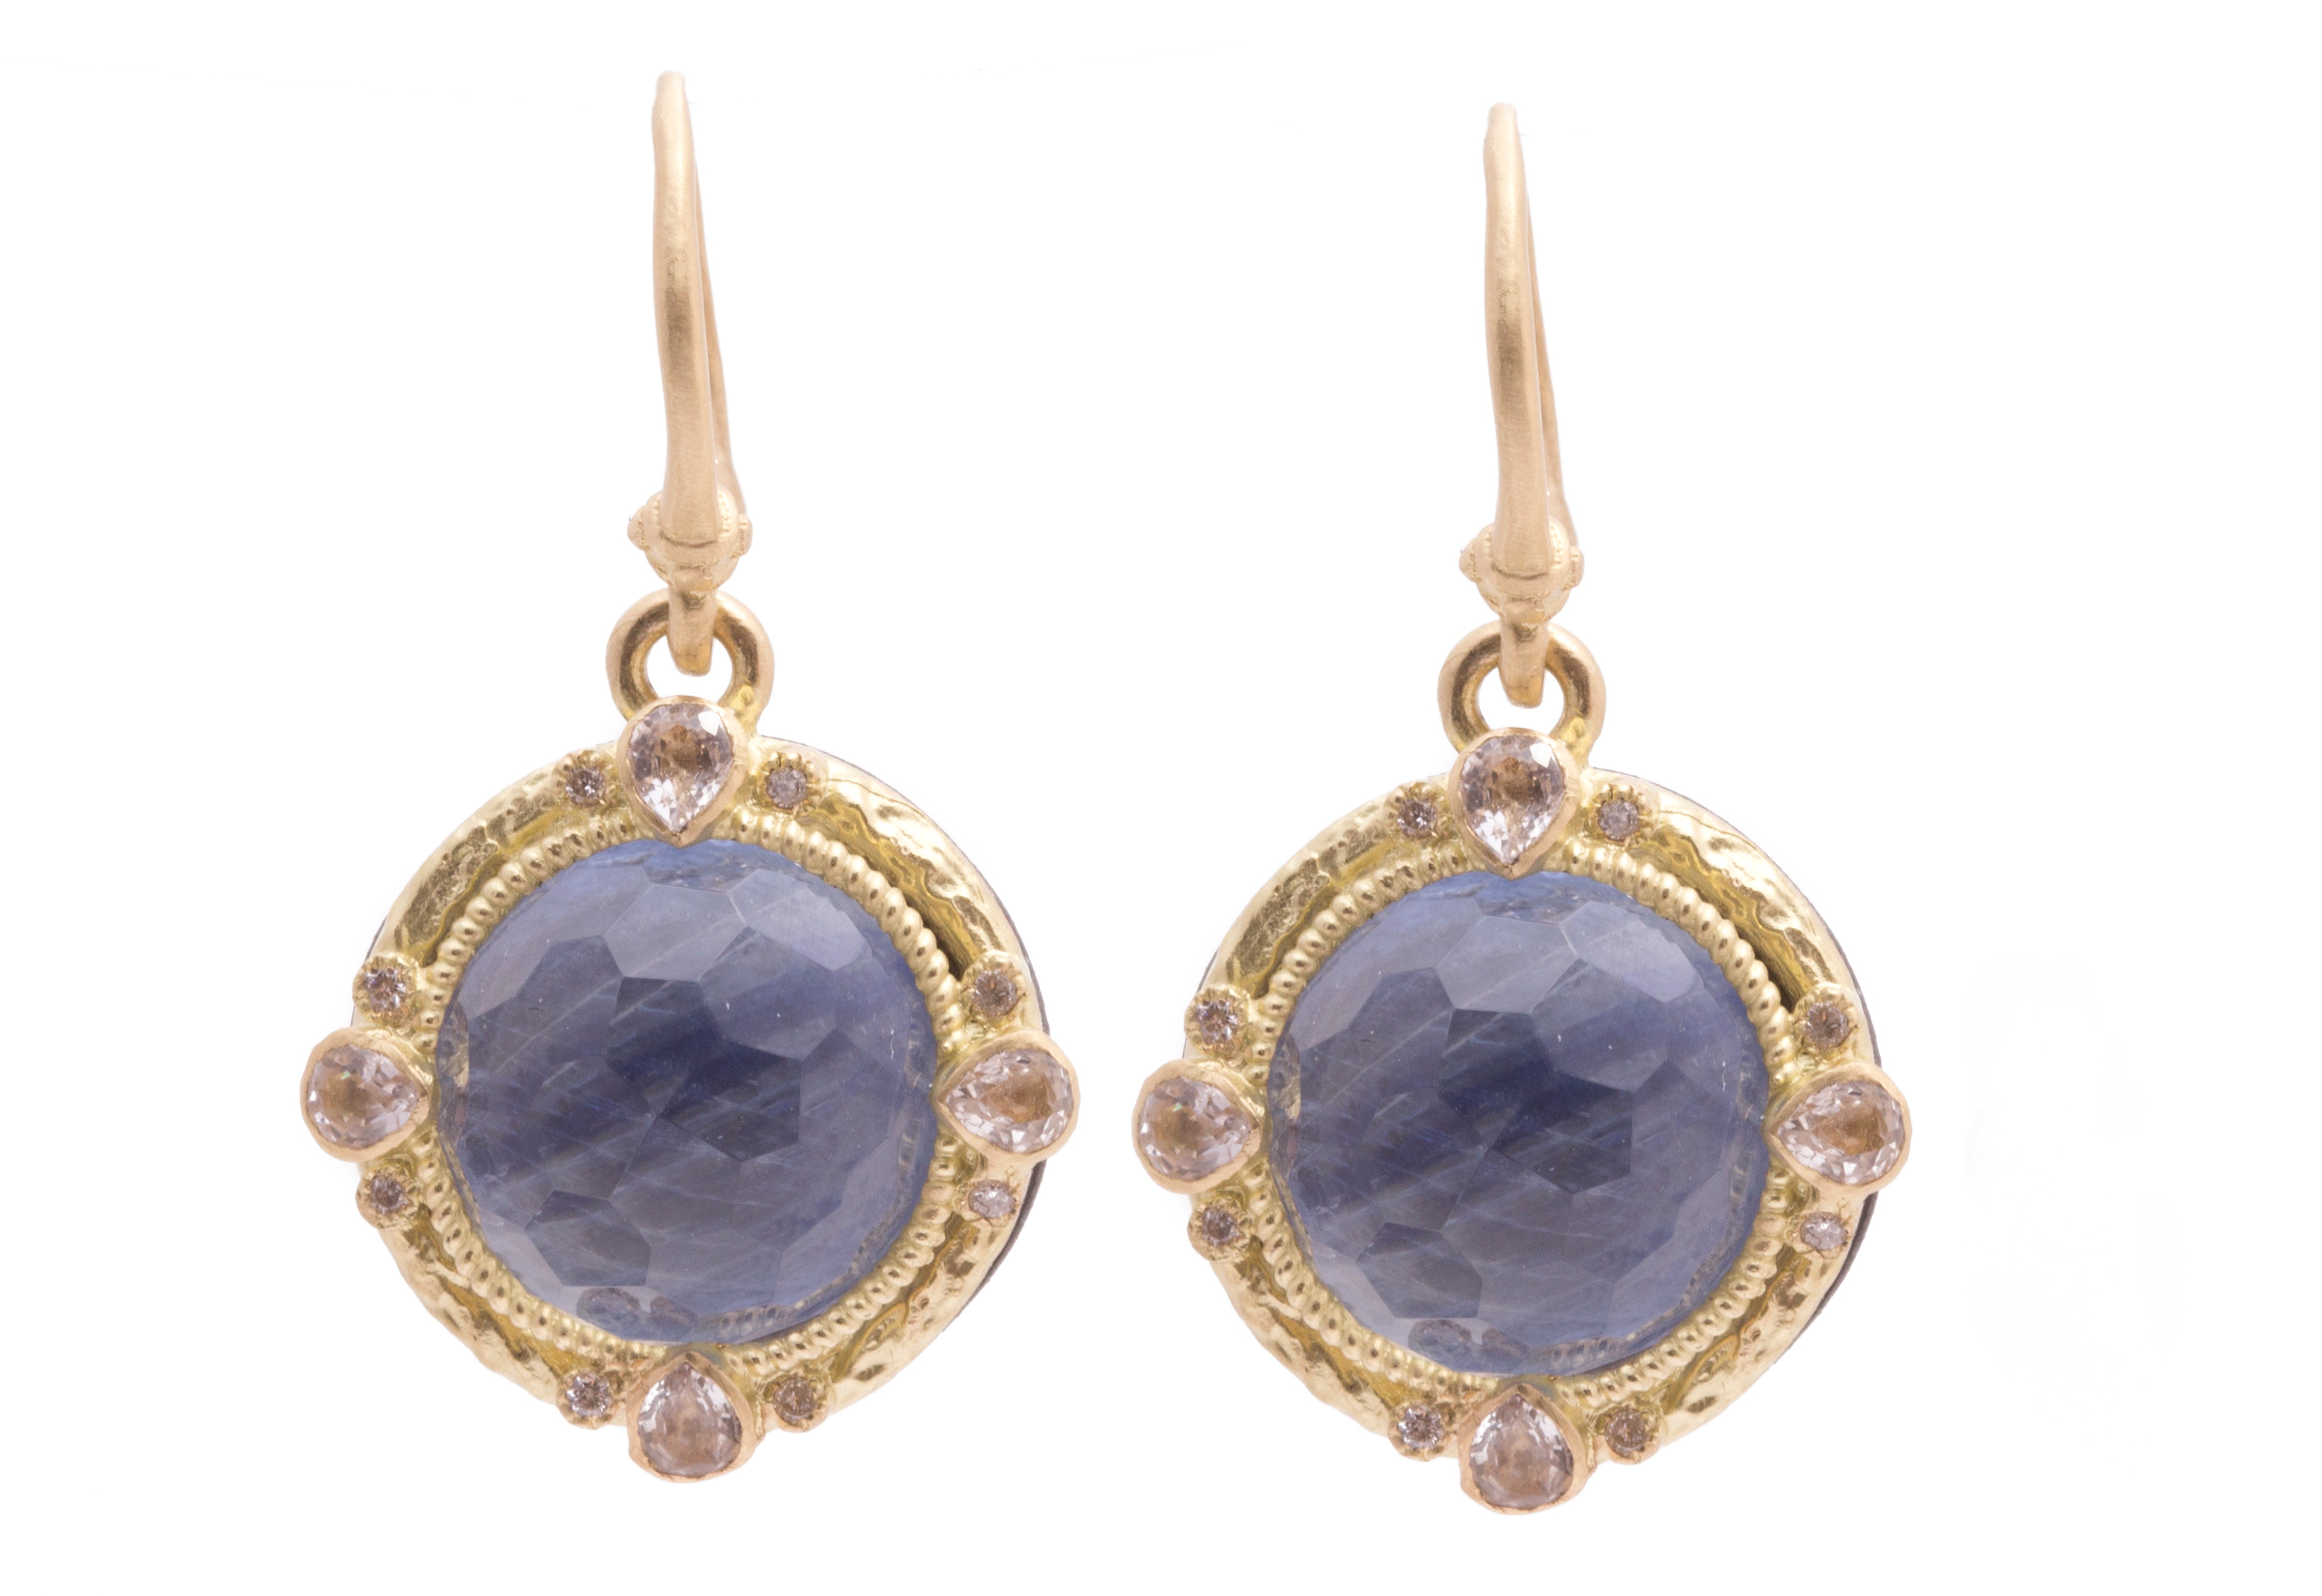 ARMENTA 18K YELLOW GOLD AND STERLING SILVER KYANITE QTARTZ AND DIAMOND EARRINGS 07326